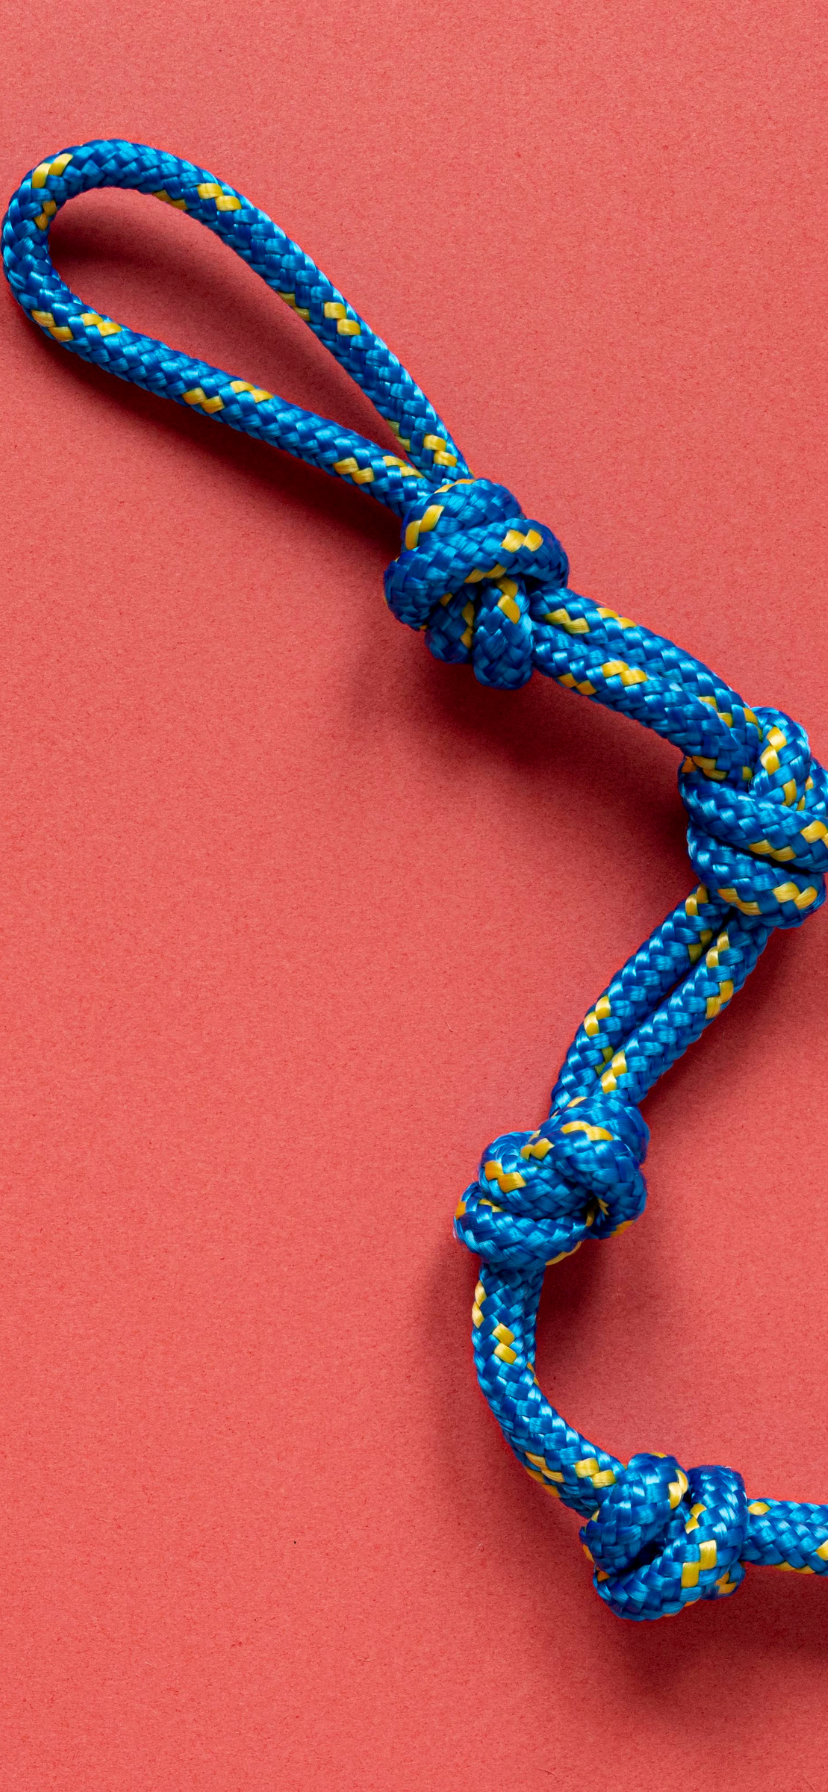 Nylon Rope vs PP Rope: Differences, Properties, and Uses